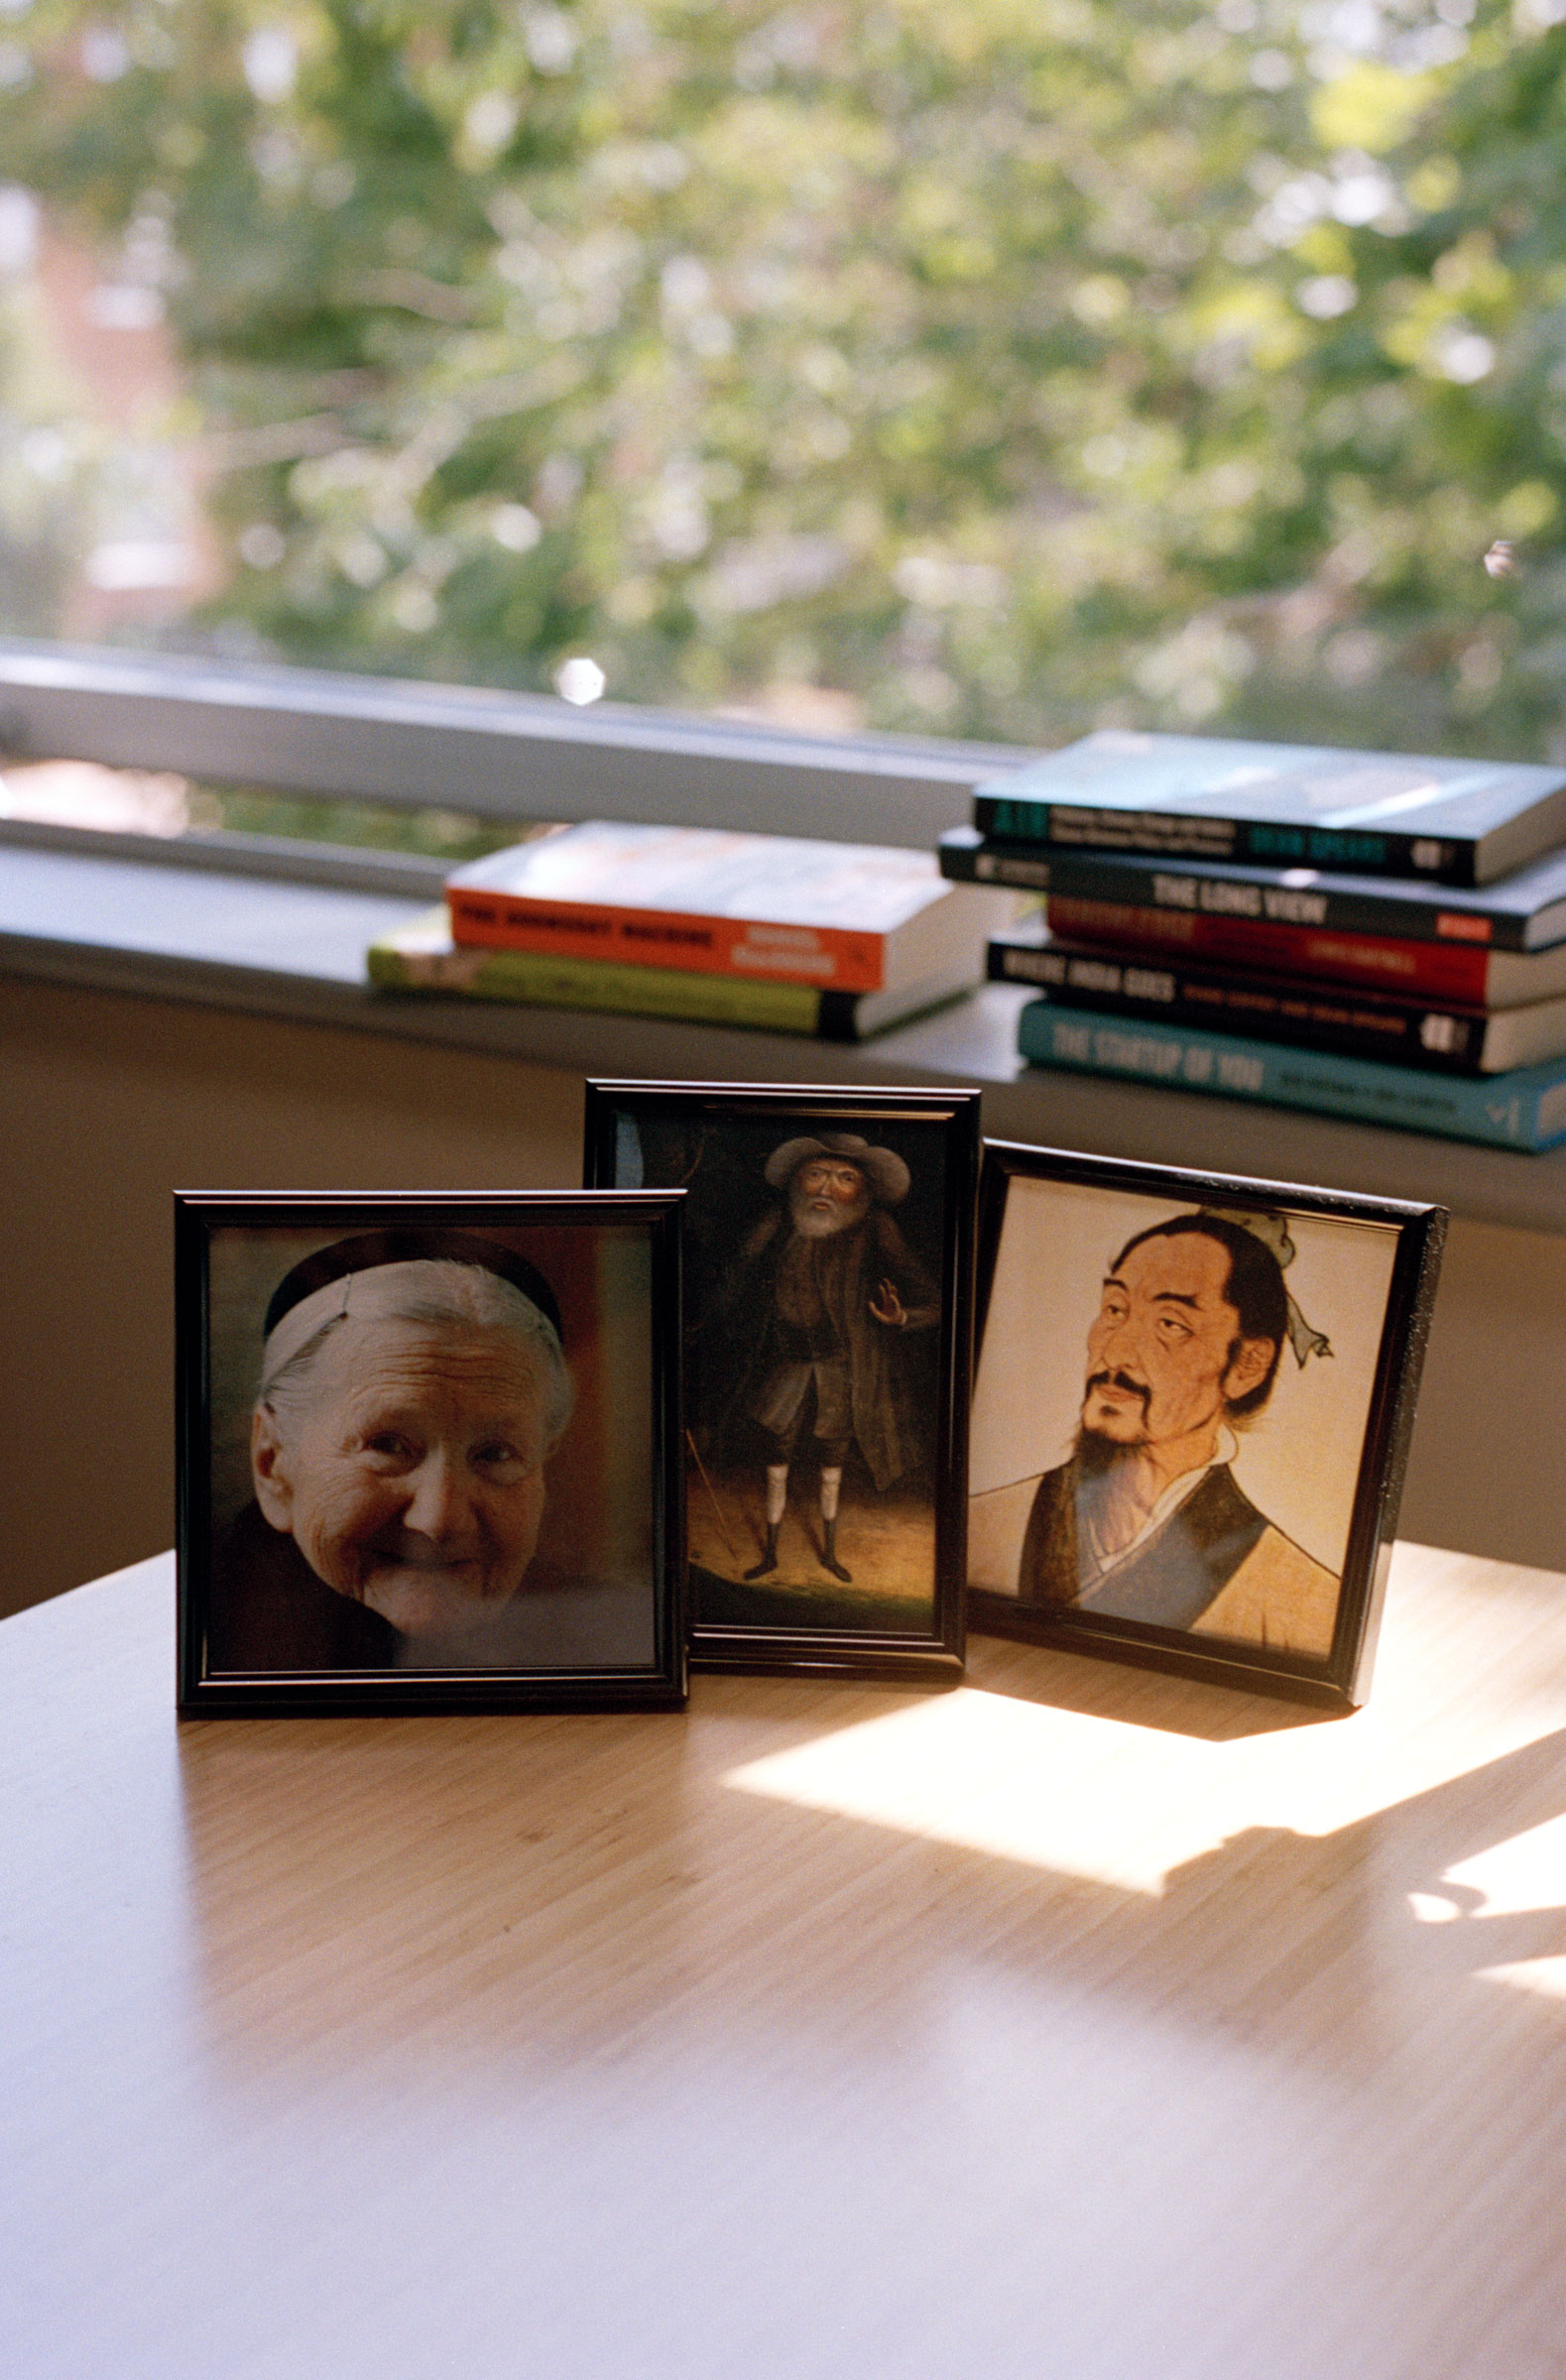 The moral pioneers on William MacAskill’s desk: humanitarian Irena Sendler, abolitionist Benjamin Lay, and philosopher Mozi (Sophie Green for TIME)